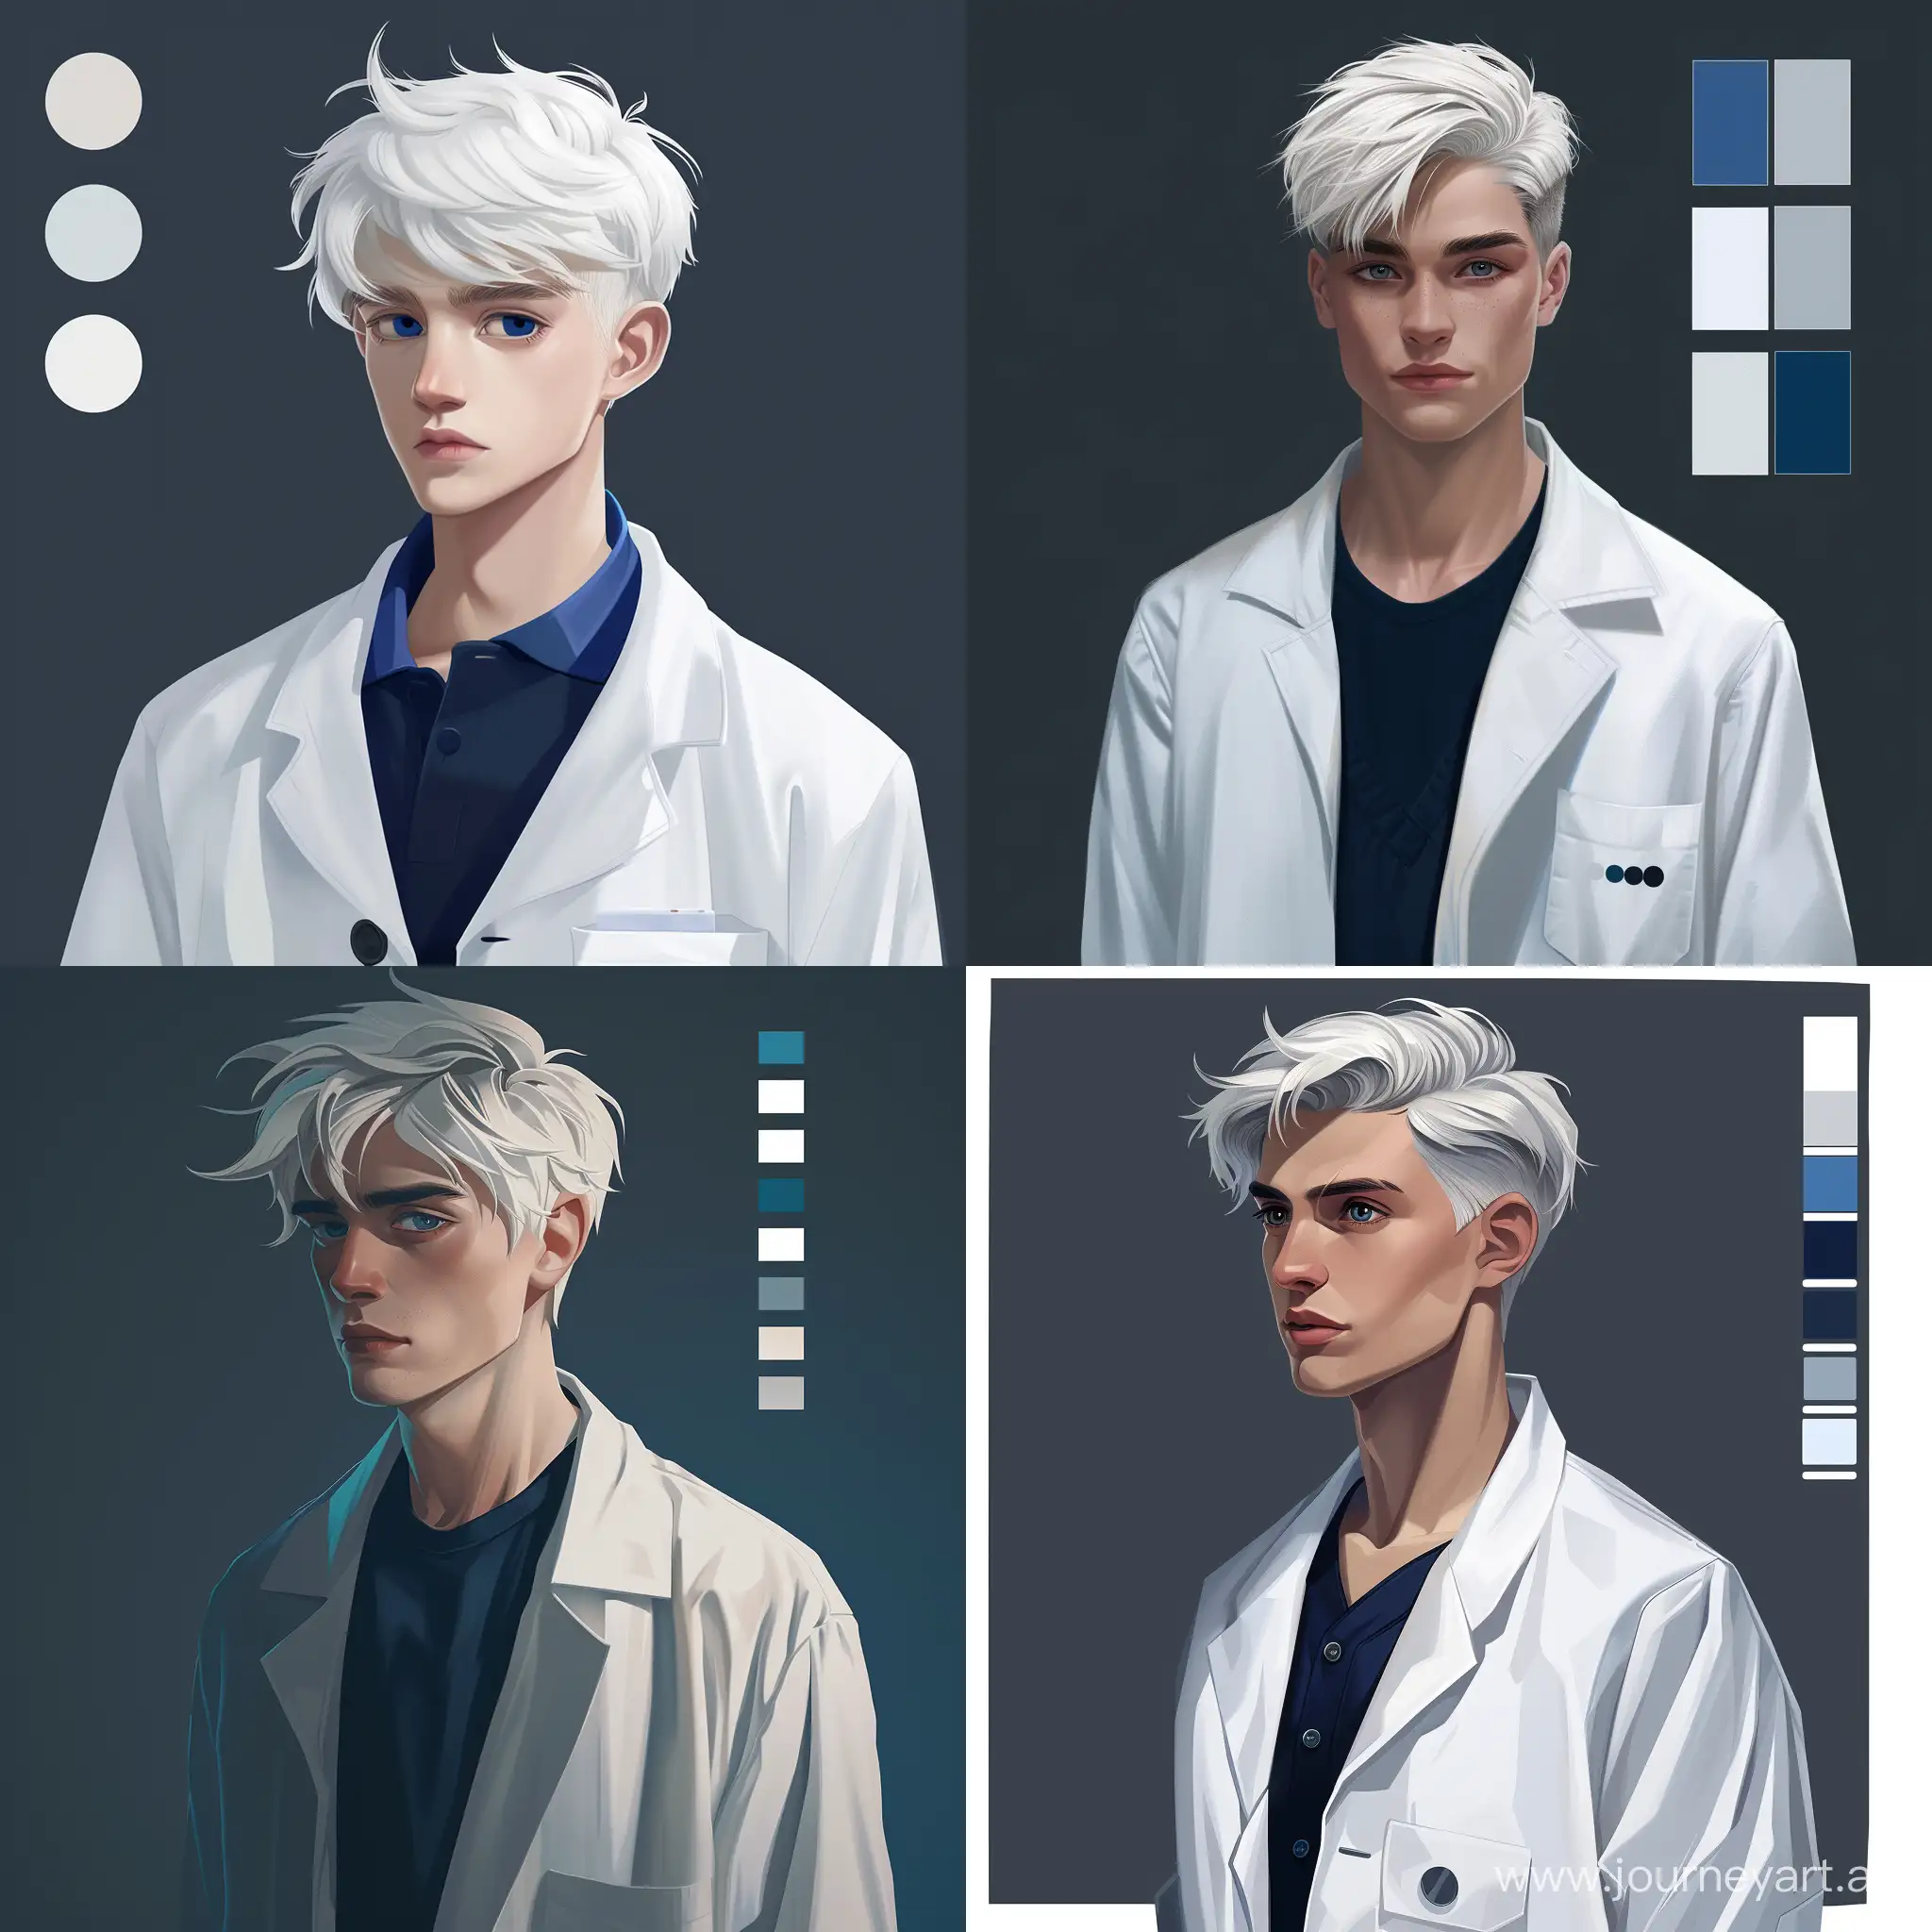 Realistic-Male-Vtuber-Avatar-with-Short-White-Hair-and-Lab-Coat